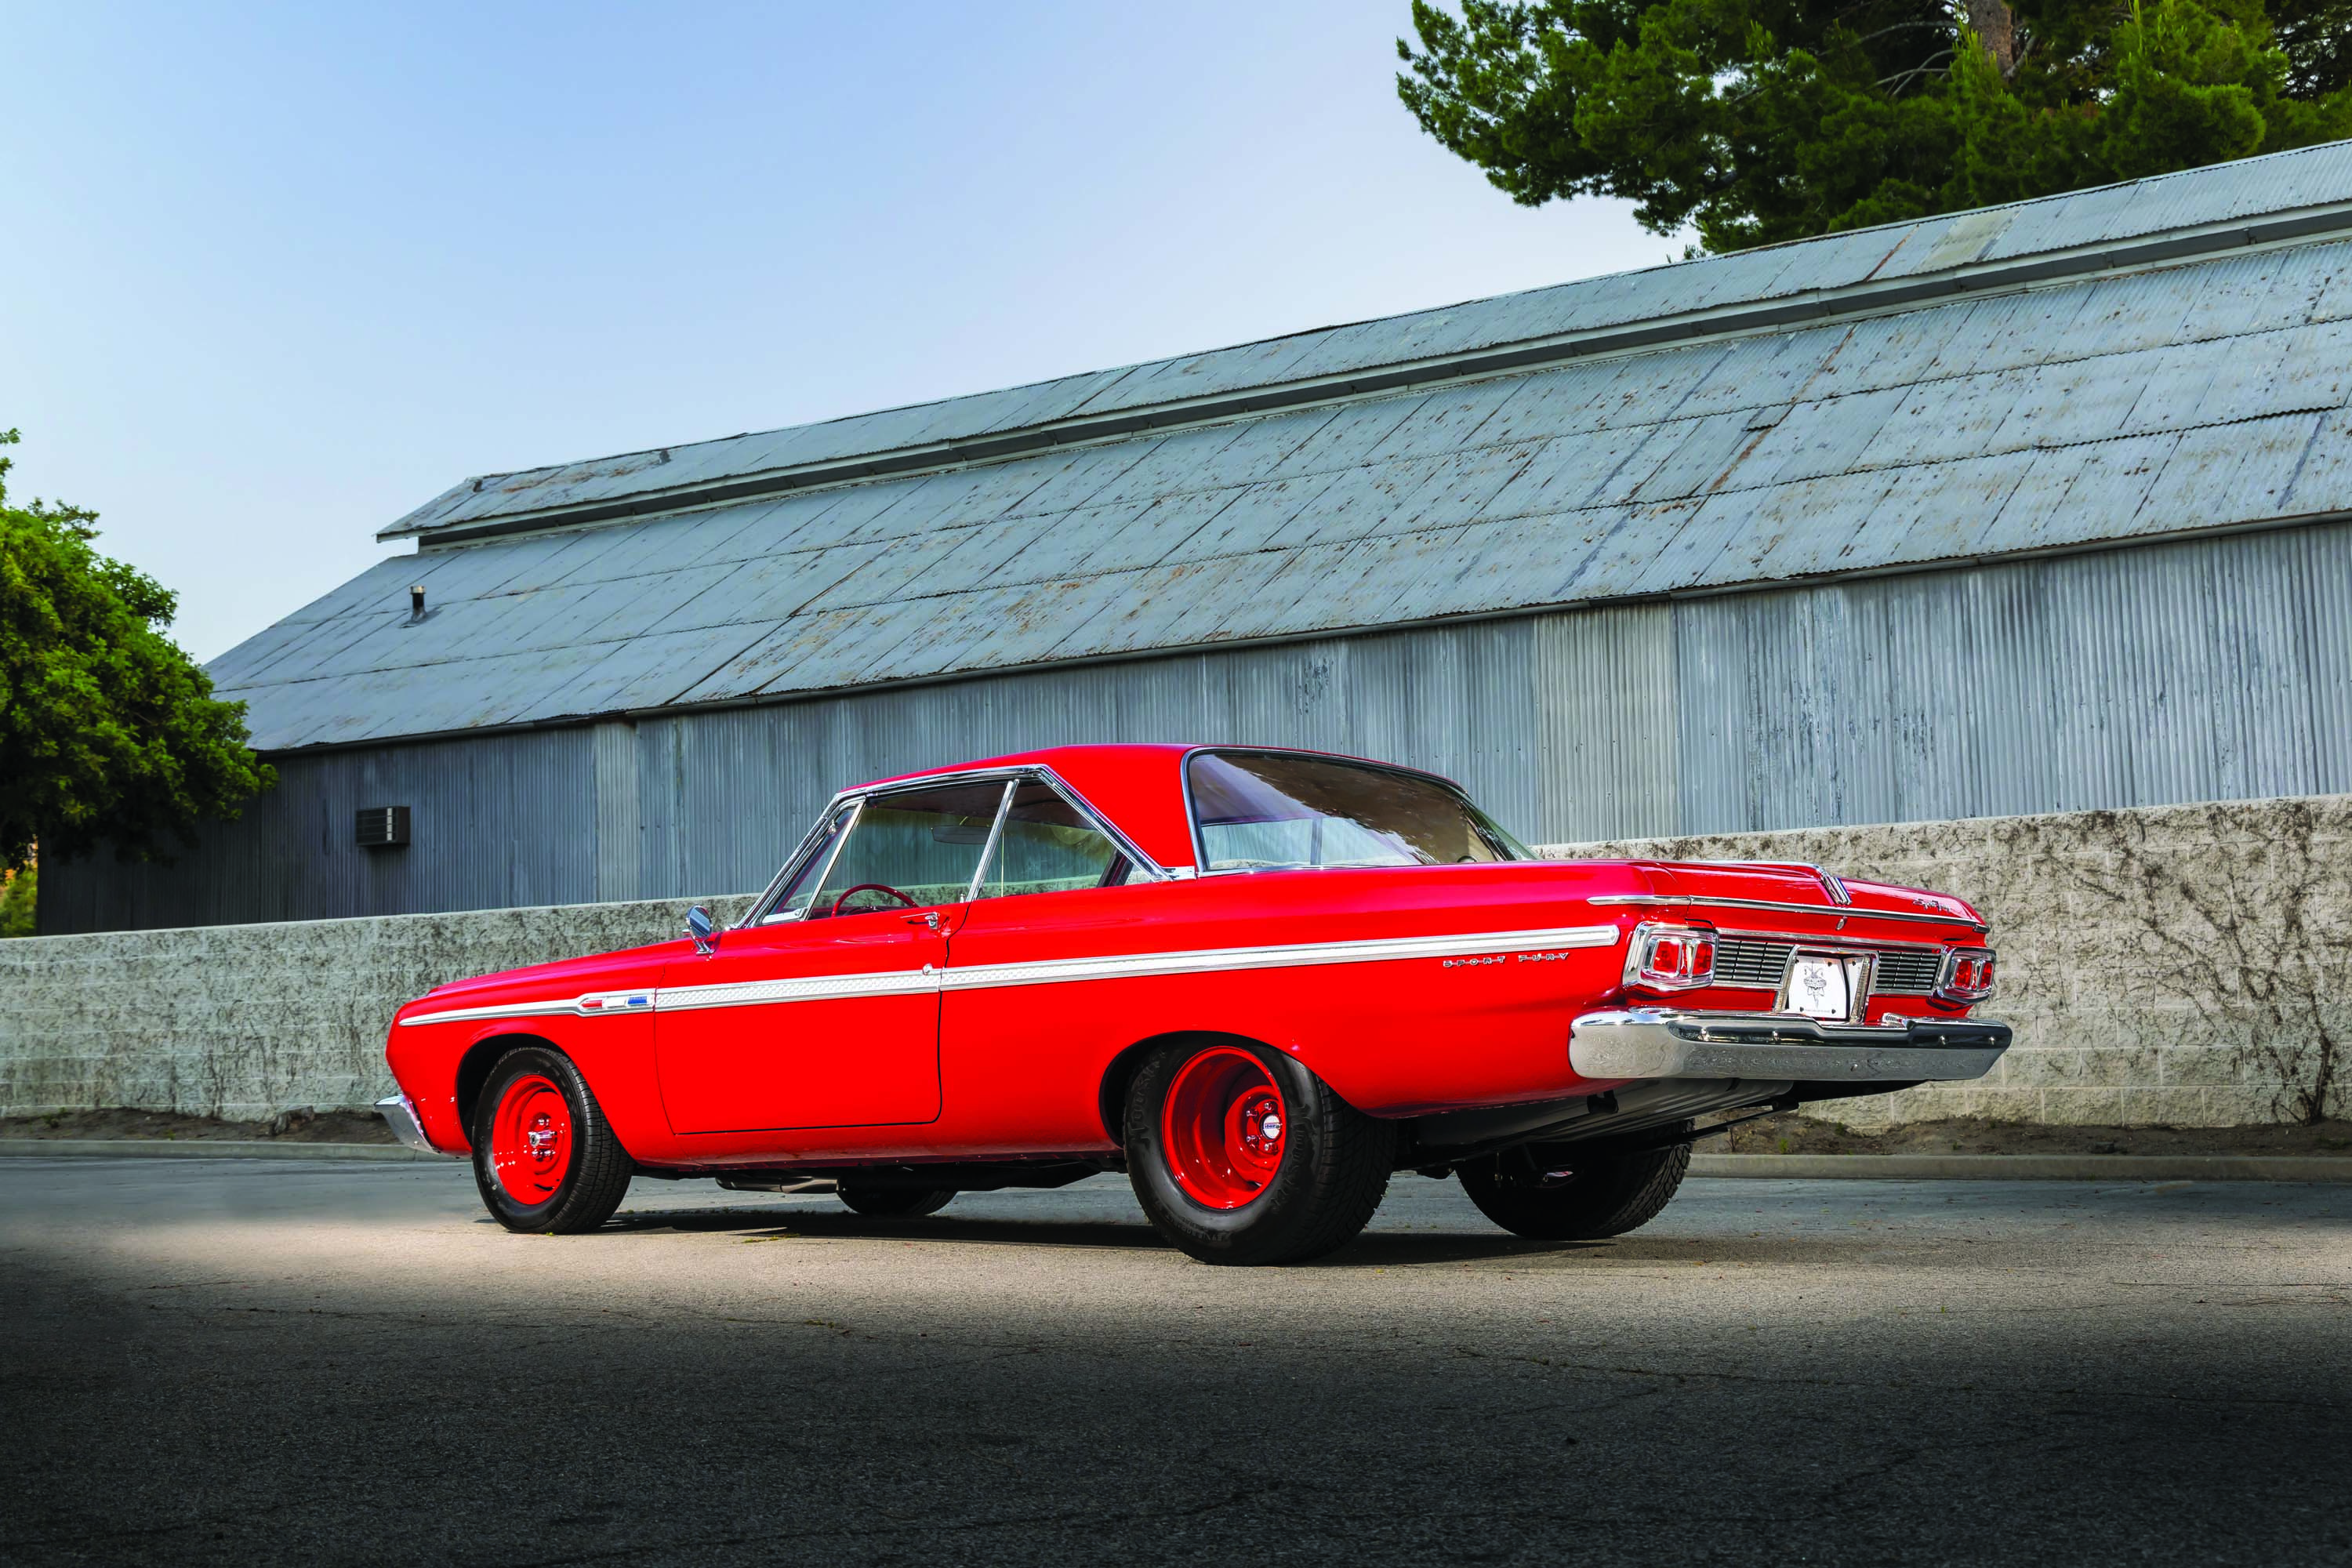 Sixty Years Of Legends Built This 1964 Plymouth Sport Fury